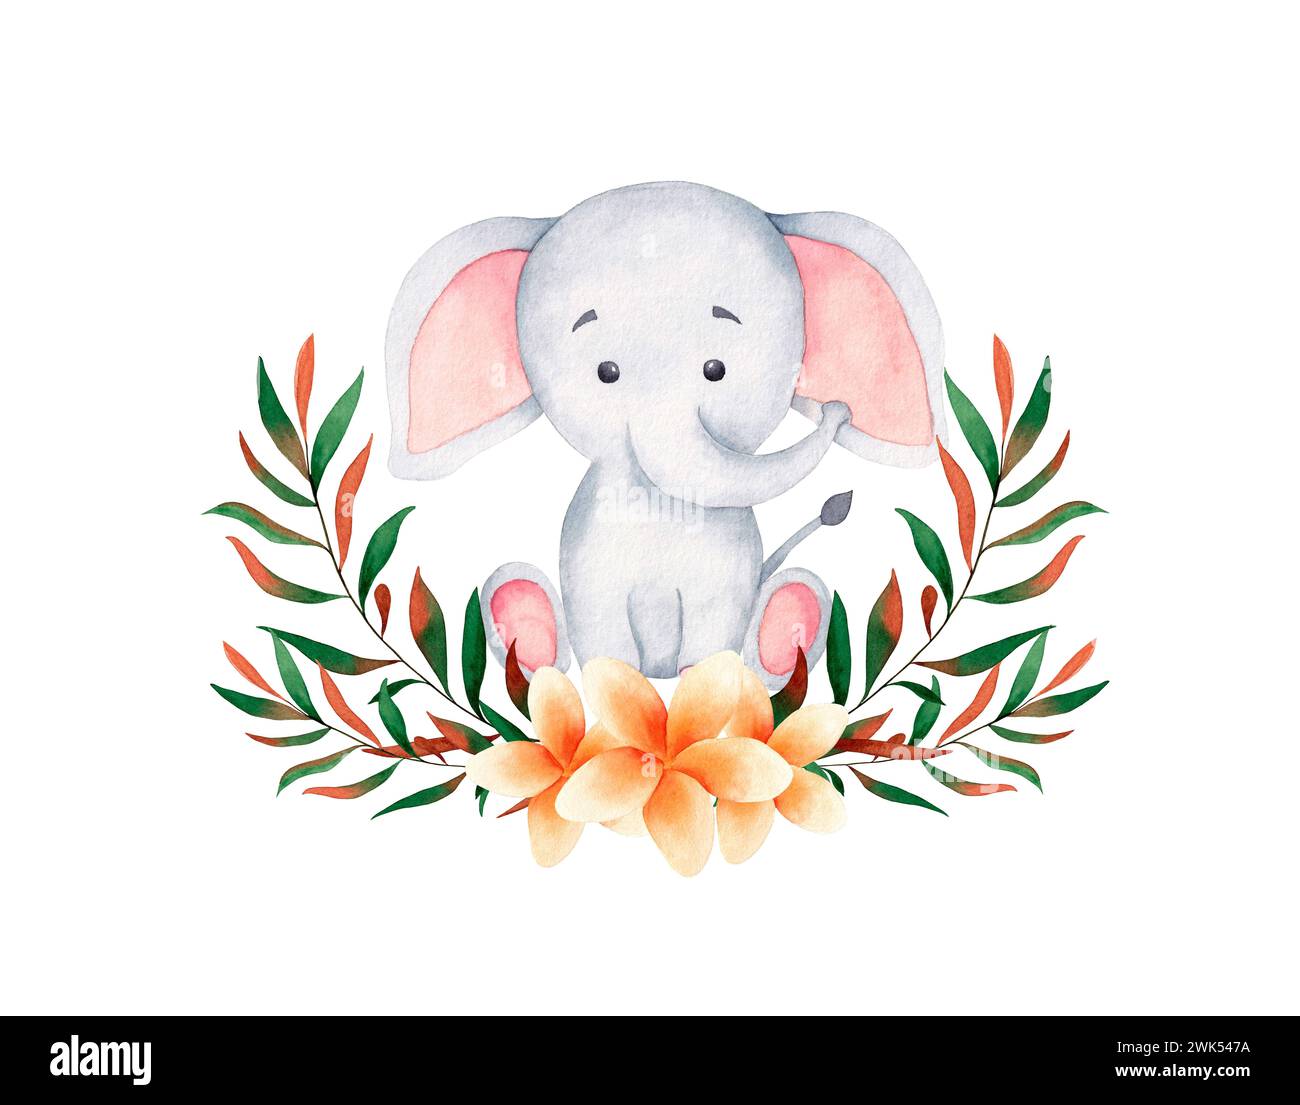 Watercolor cute baby elephant, sitting, surrounded by a wreath of tropical plants and flowers . Hand drawn illustration, isolated on white background Stock Photo